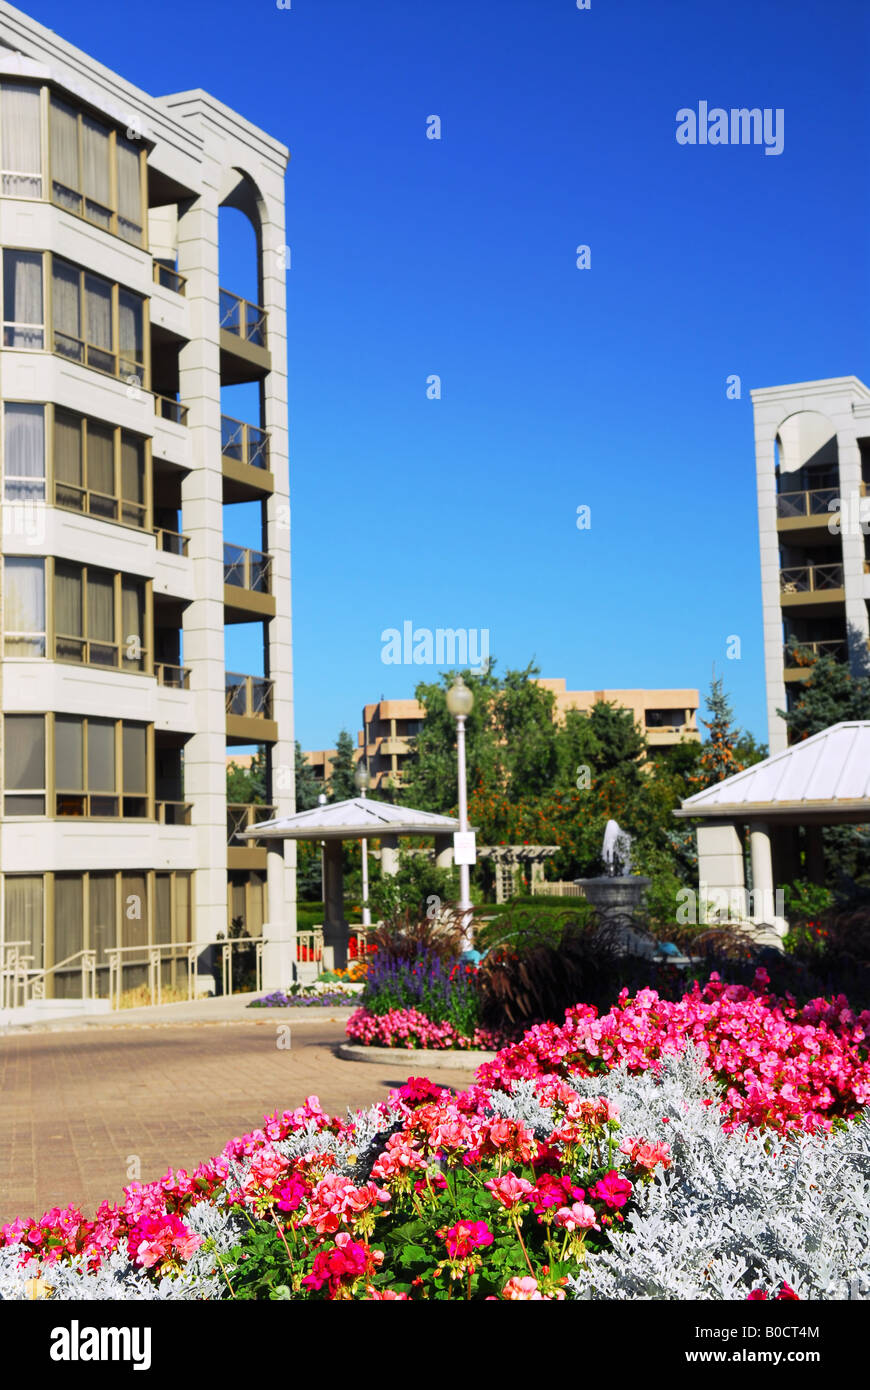 View of modern upscale condominium buildings with landscaping Stock Photo